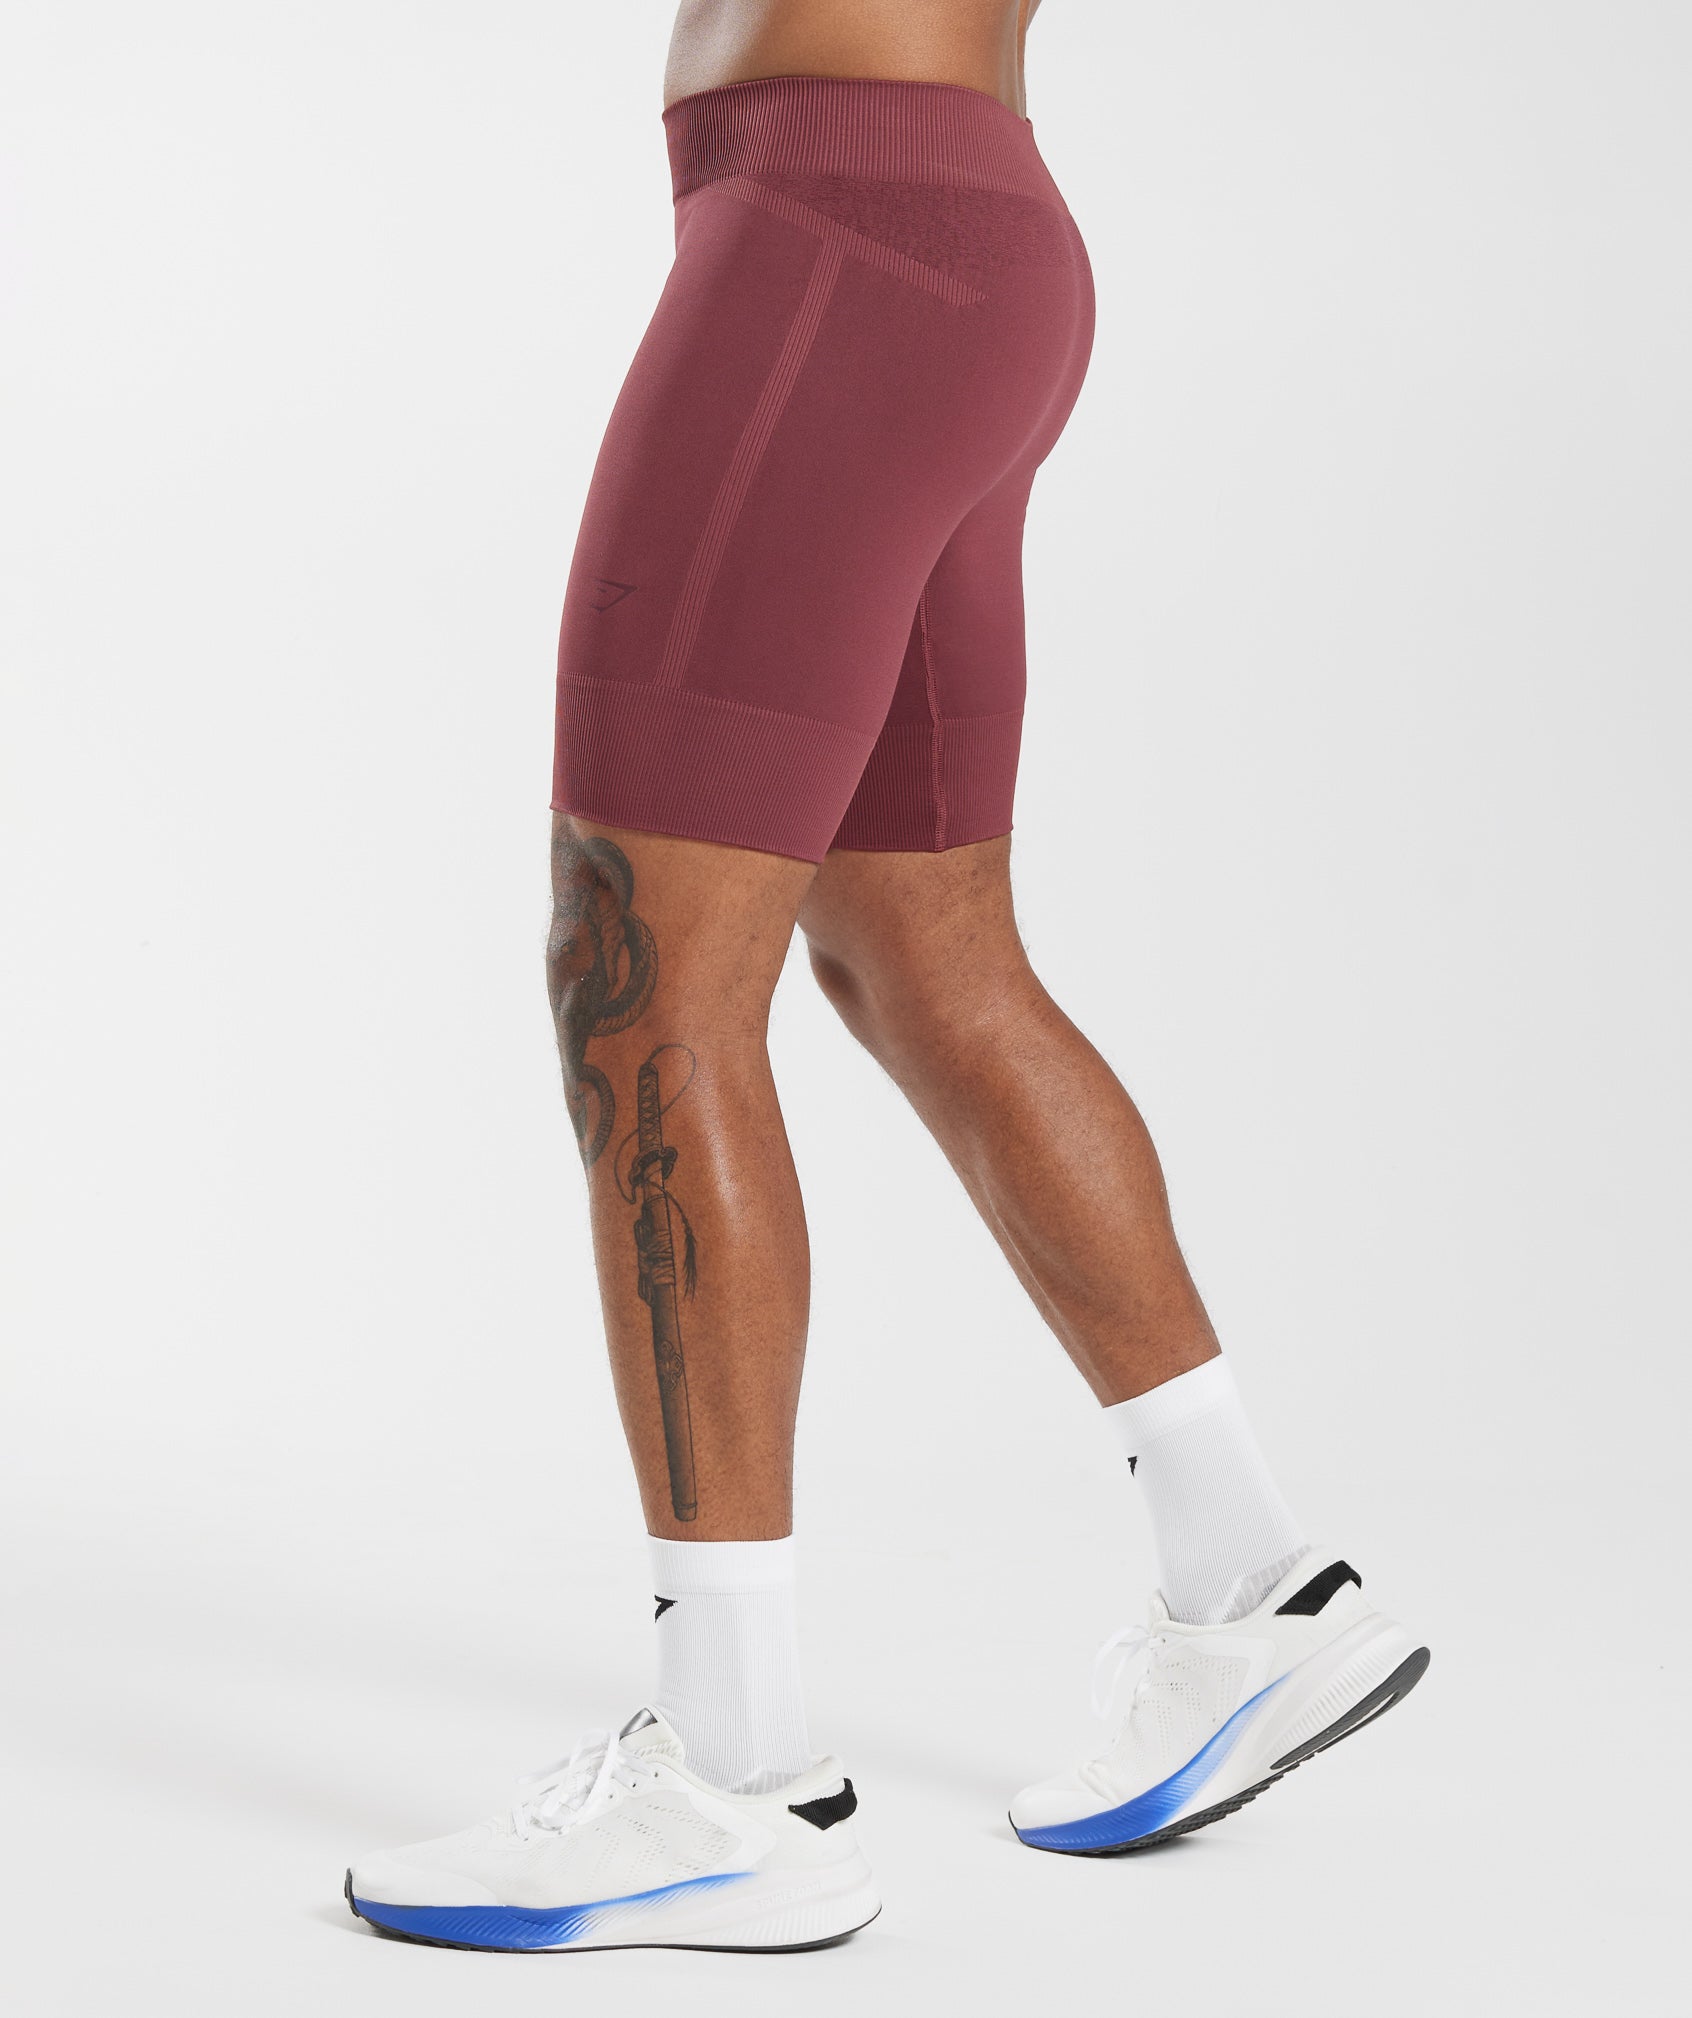 Running Seamless 7" Shorts in Cherry Brown - view 3